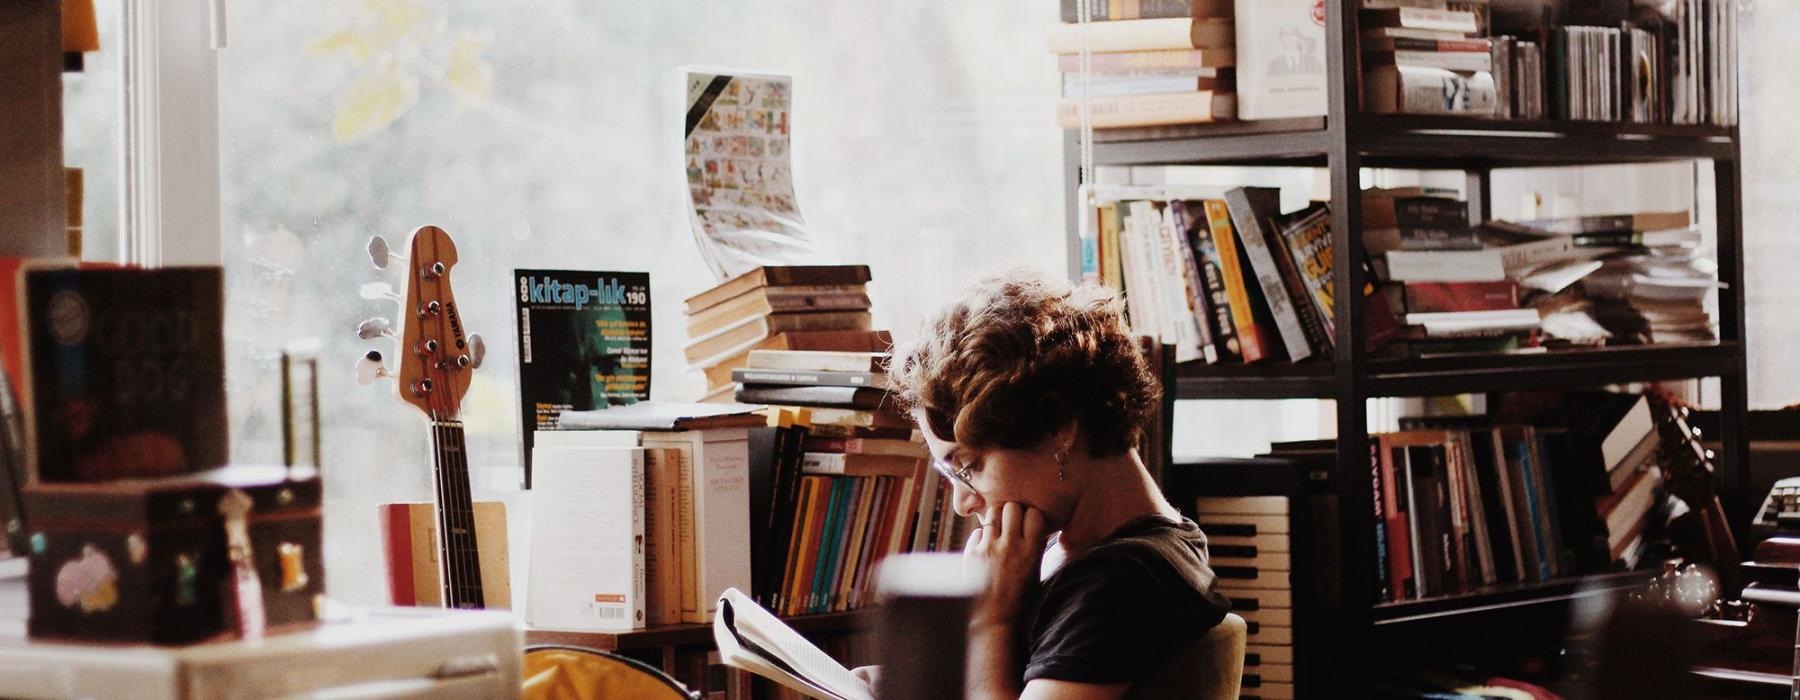 woman, surrounded by books, sits and reads in front of a picture window